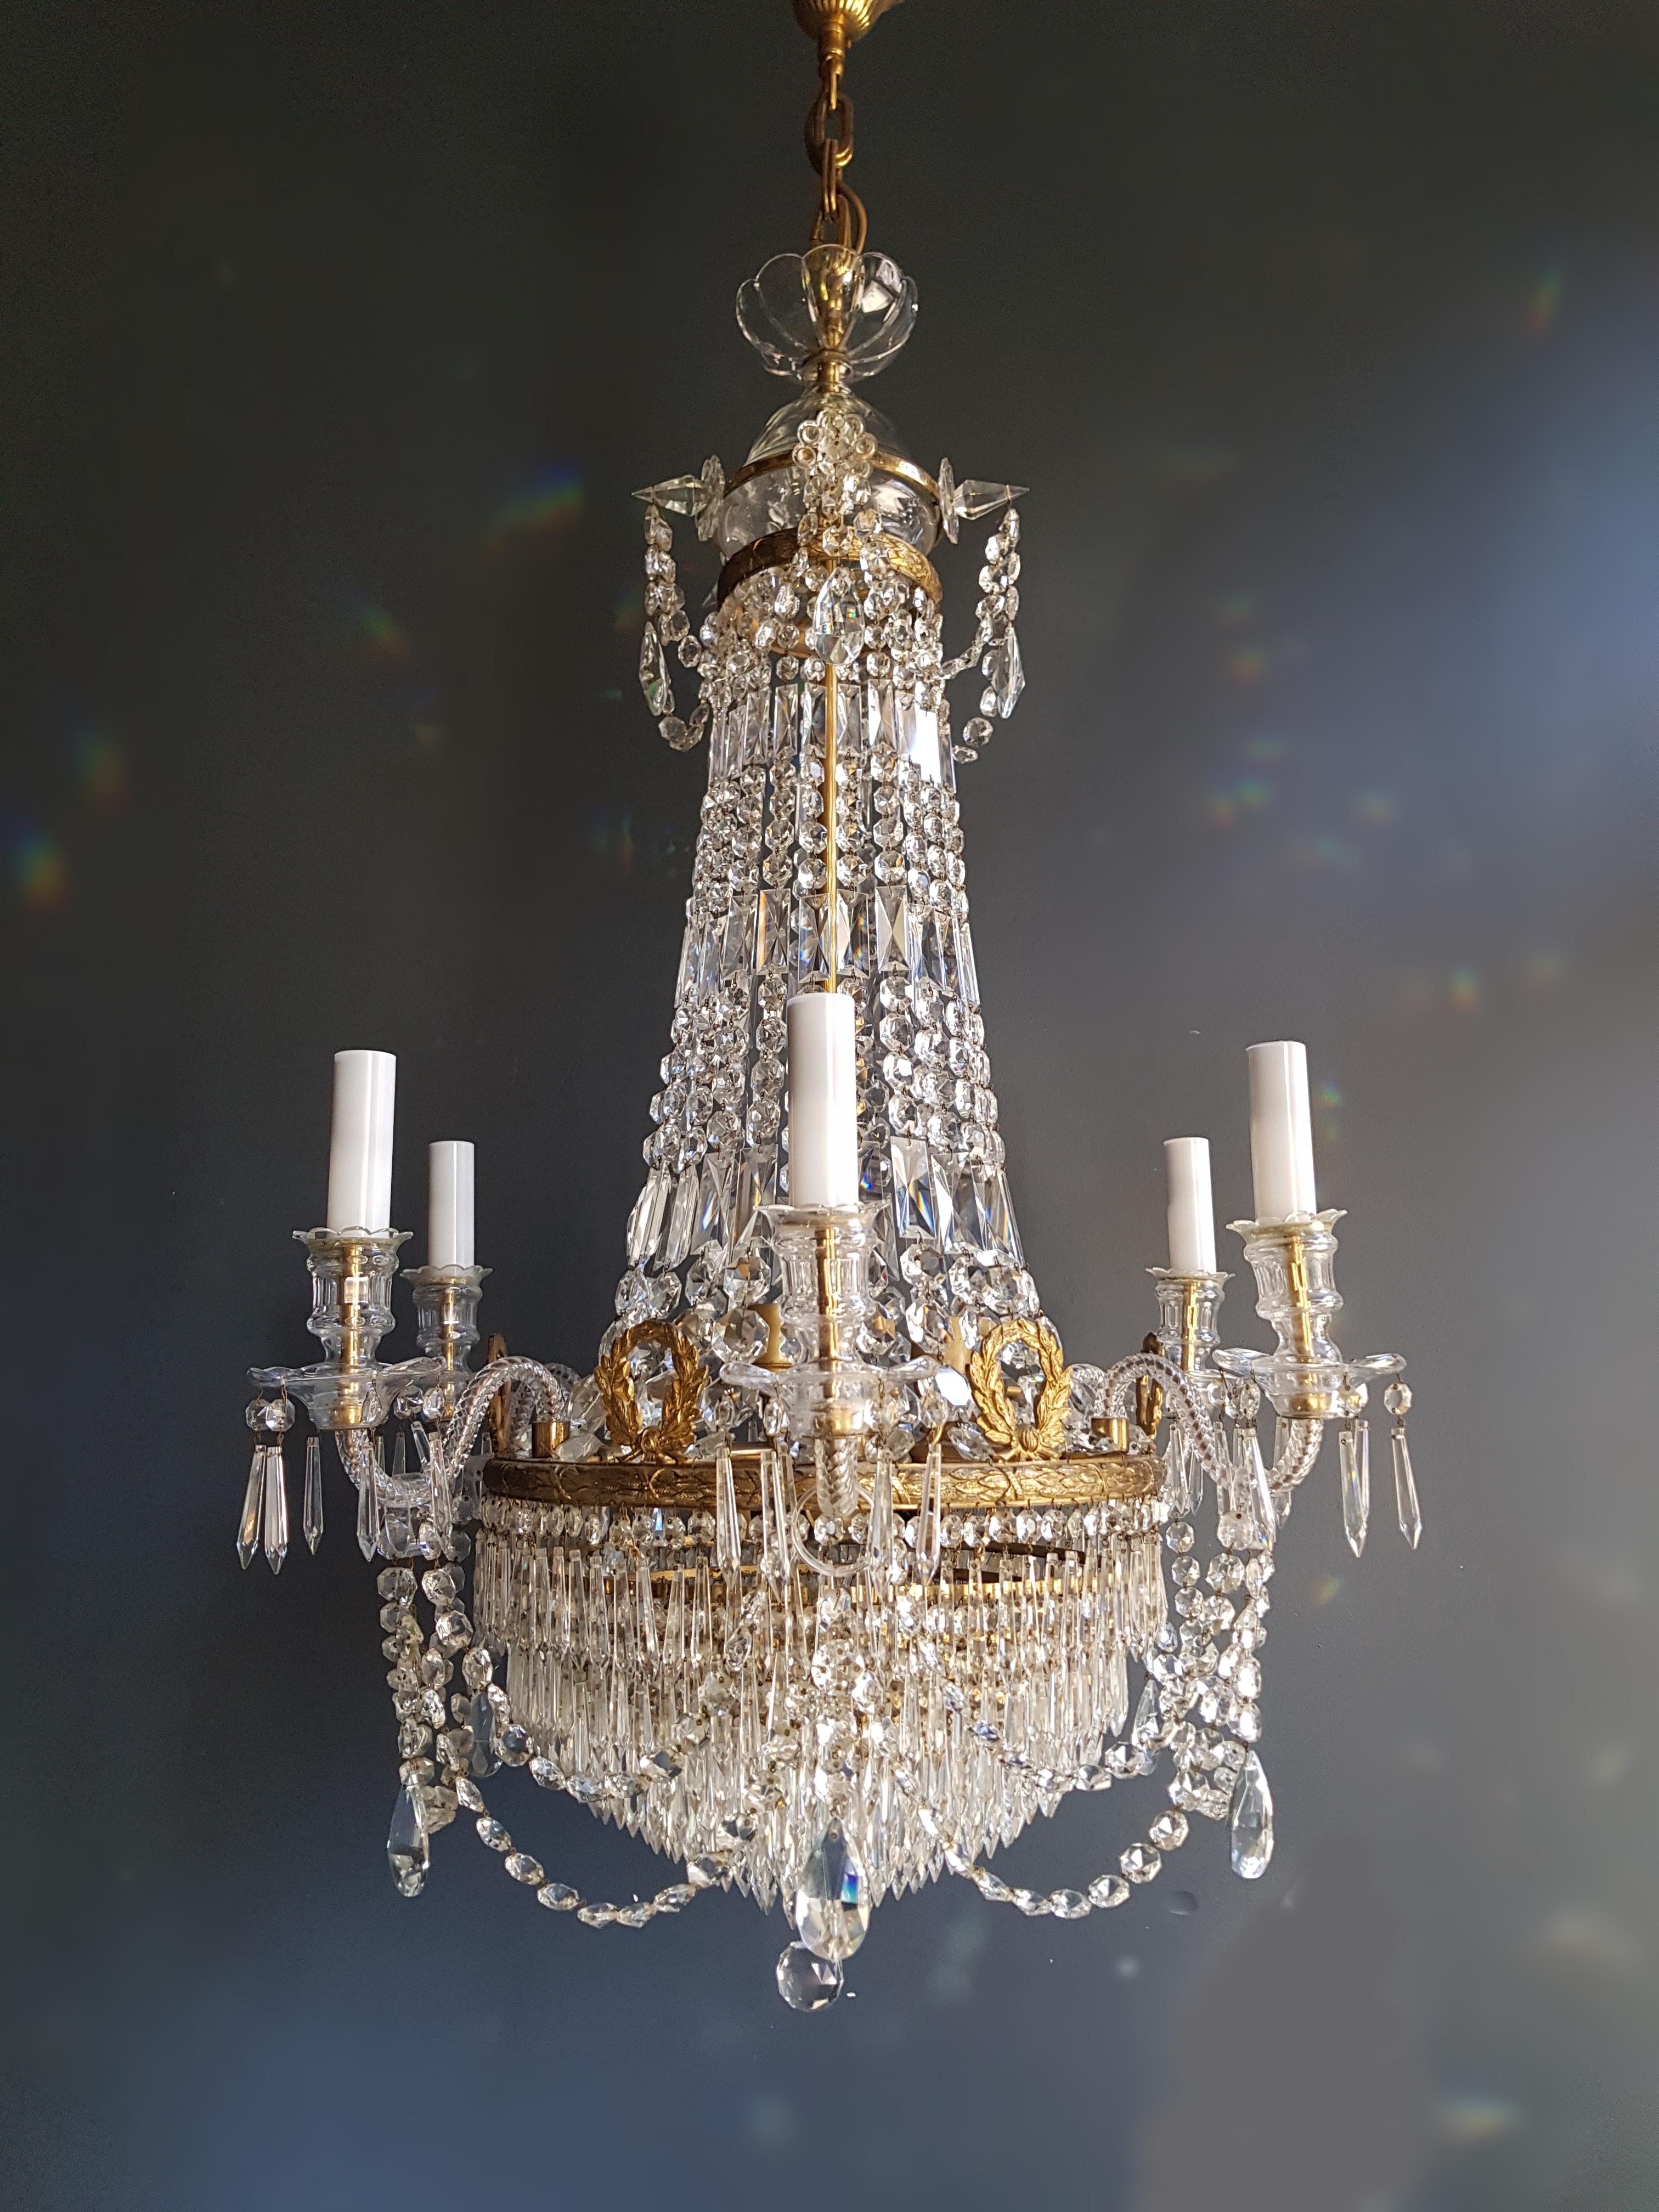 Restored Antique Chandeliers from a Baltic Sea Castle - A Pair of Timeless Elegance

Presenting a splendid pair of antique chandeliers, each meticulously restored with care and expertise in Berlin. These chandeliers not only boast captivating beauty